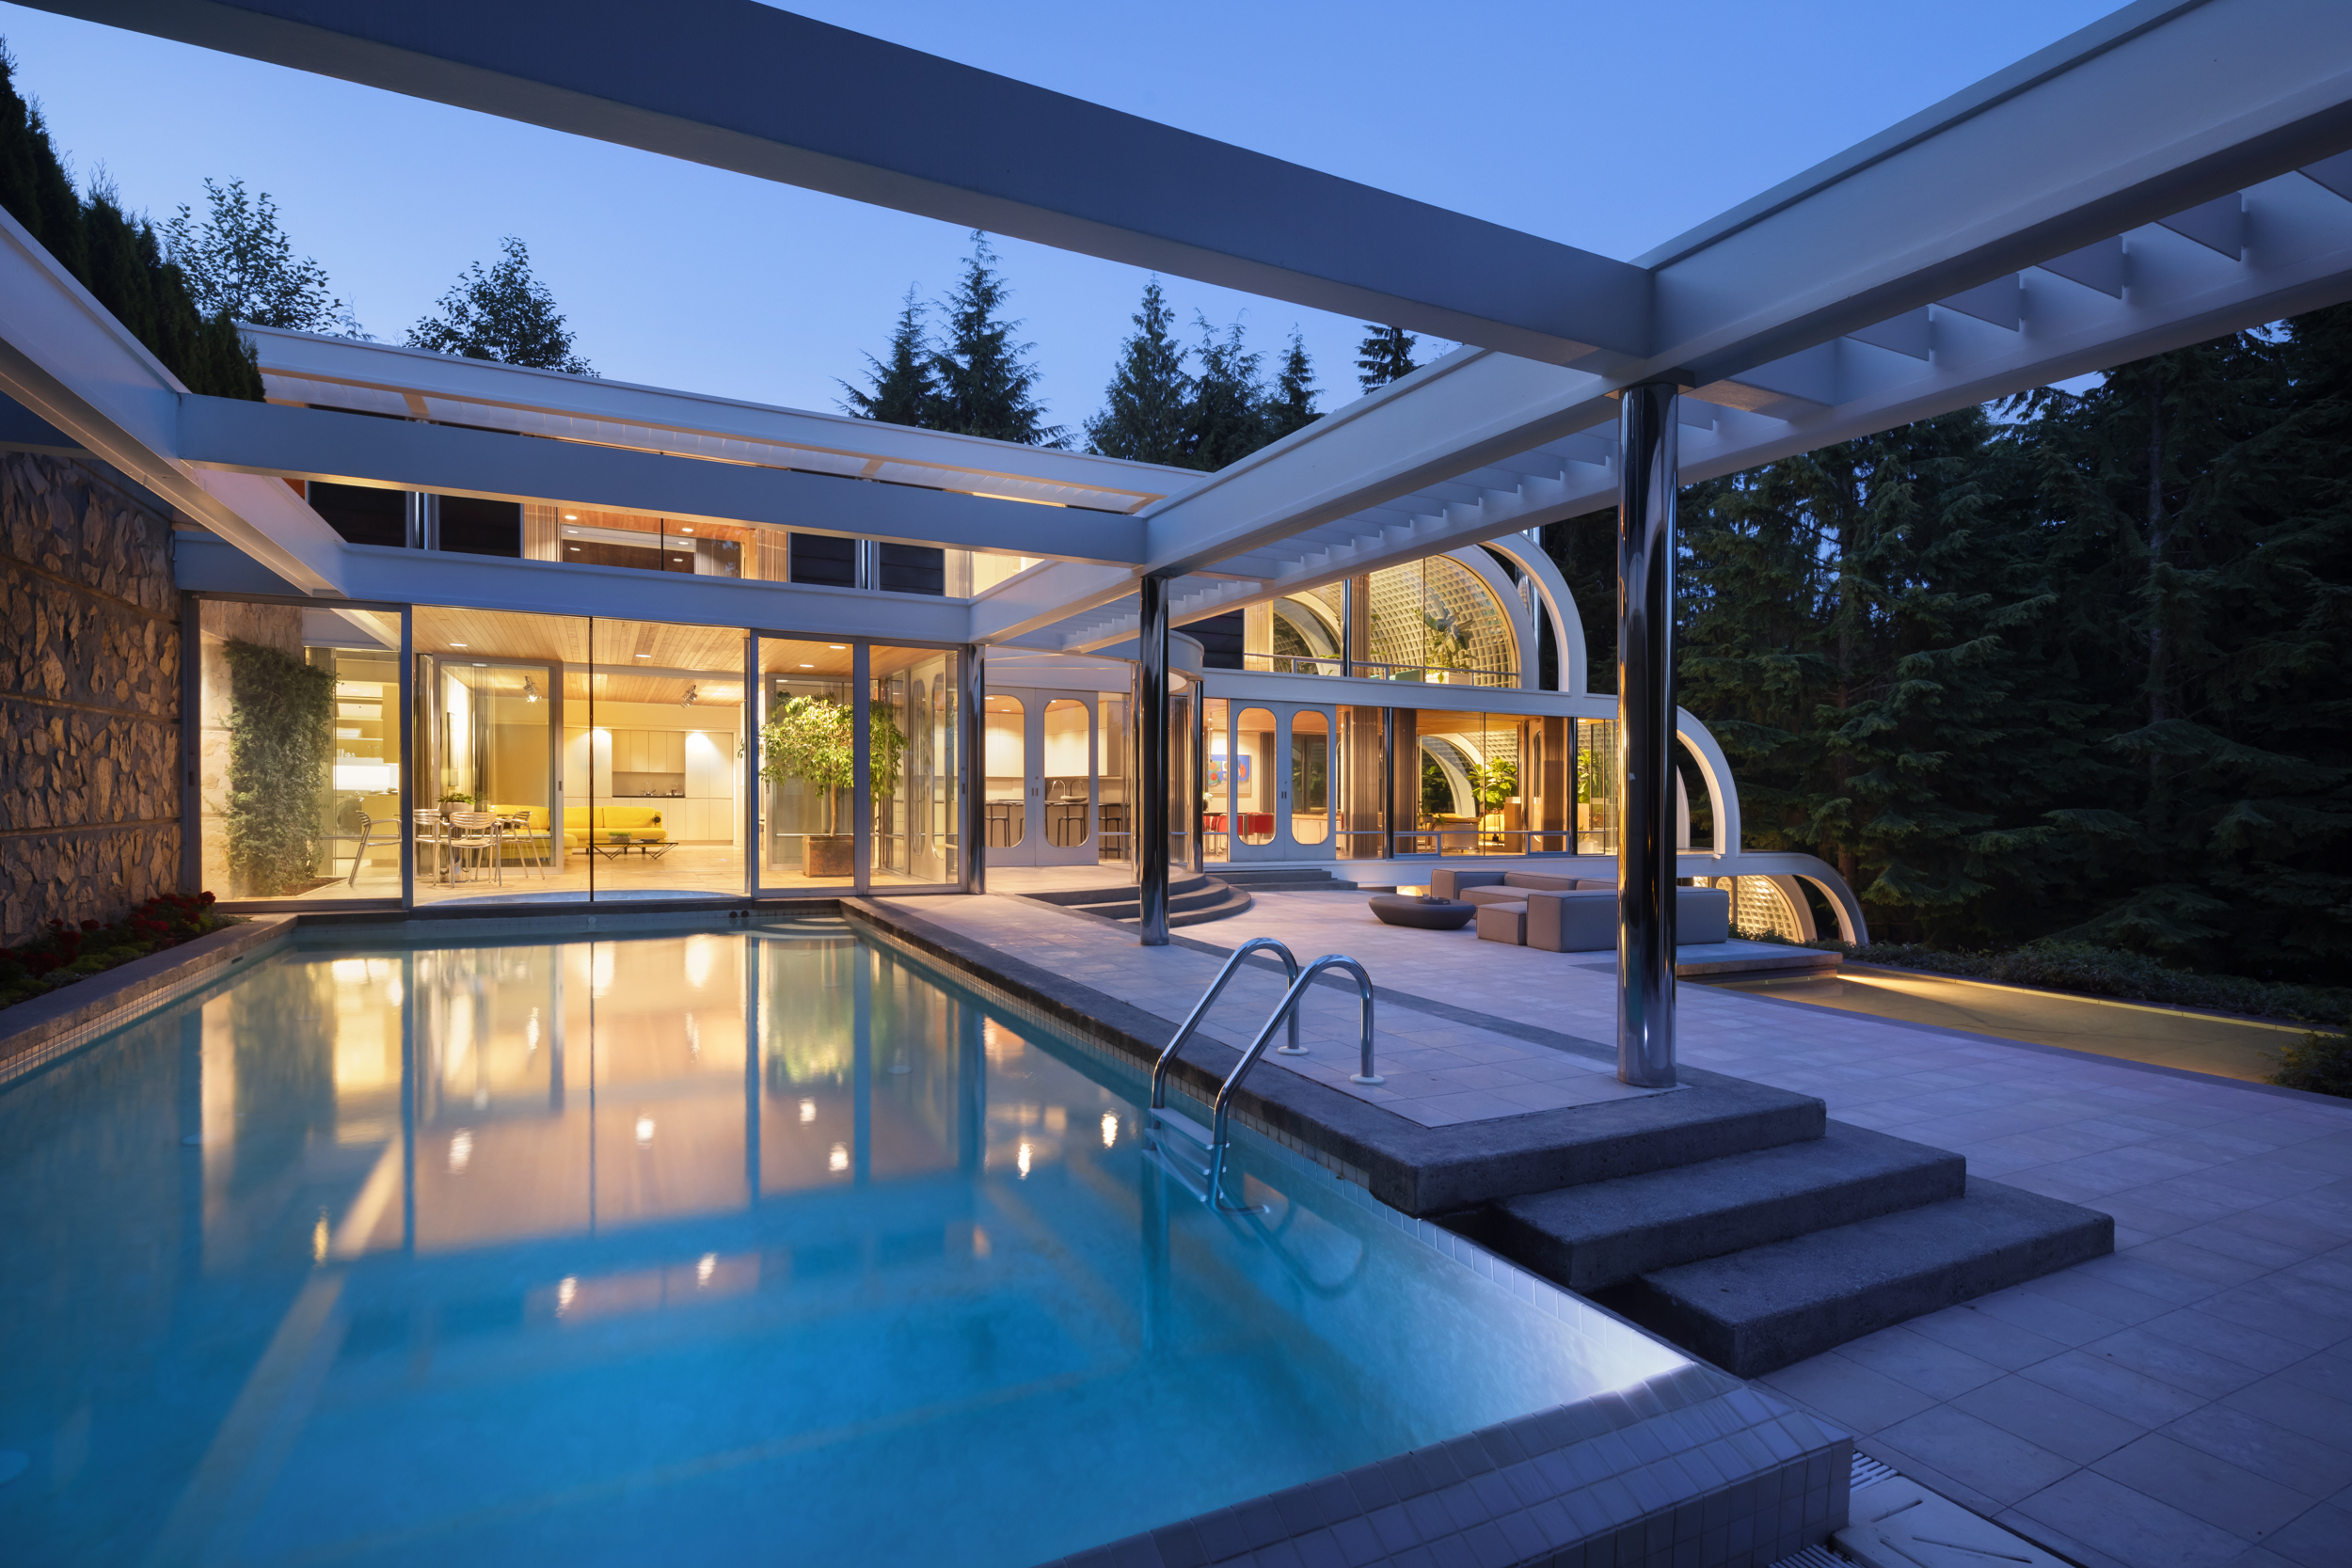 EPPICH HOUSE II - Iconic Arthur Erickson Home in the British Properties